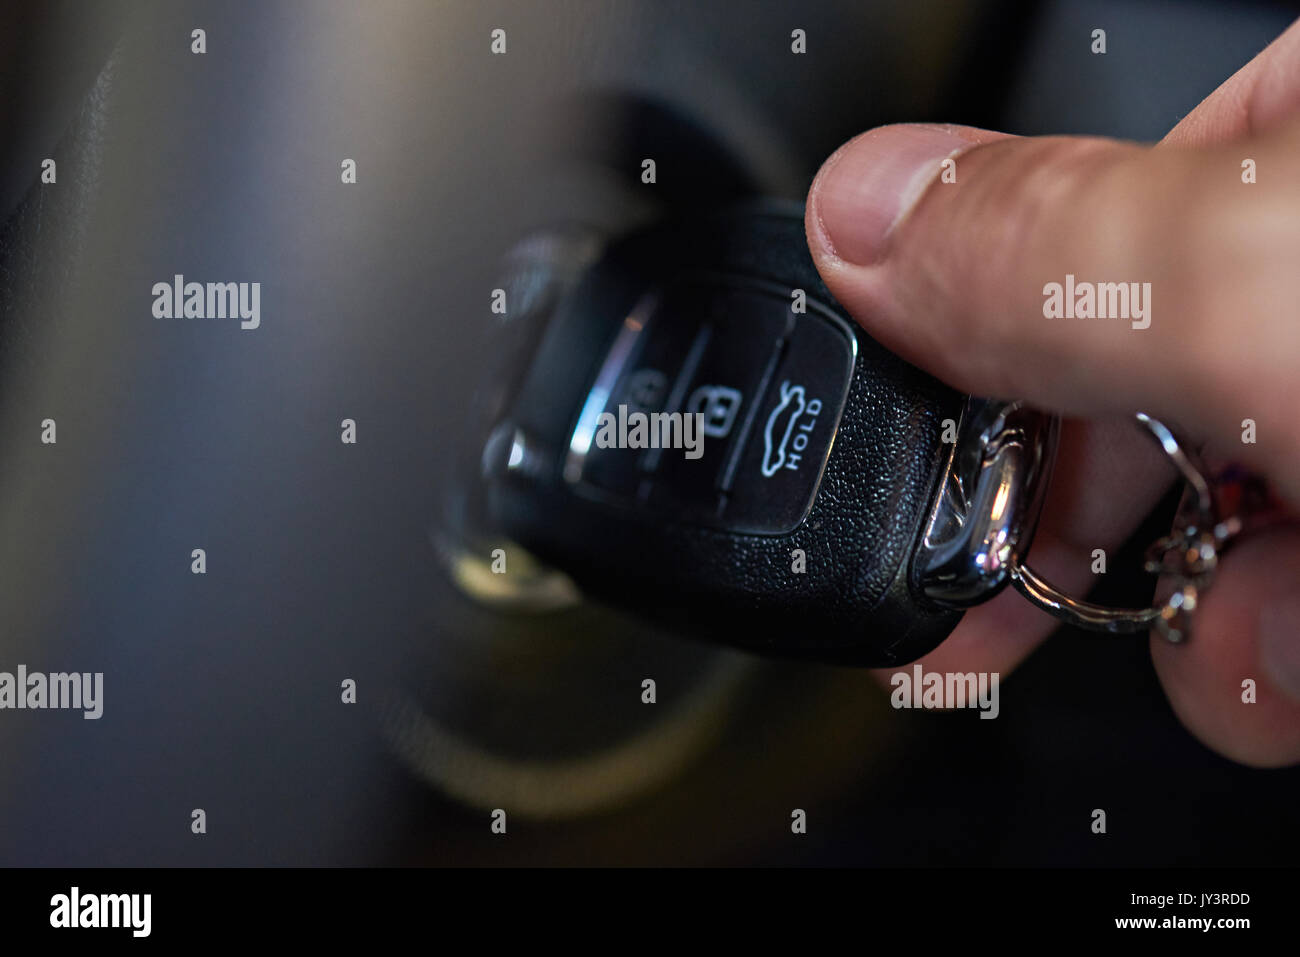 Ignition key in hand try to start car close up Stock Photo